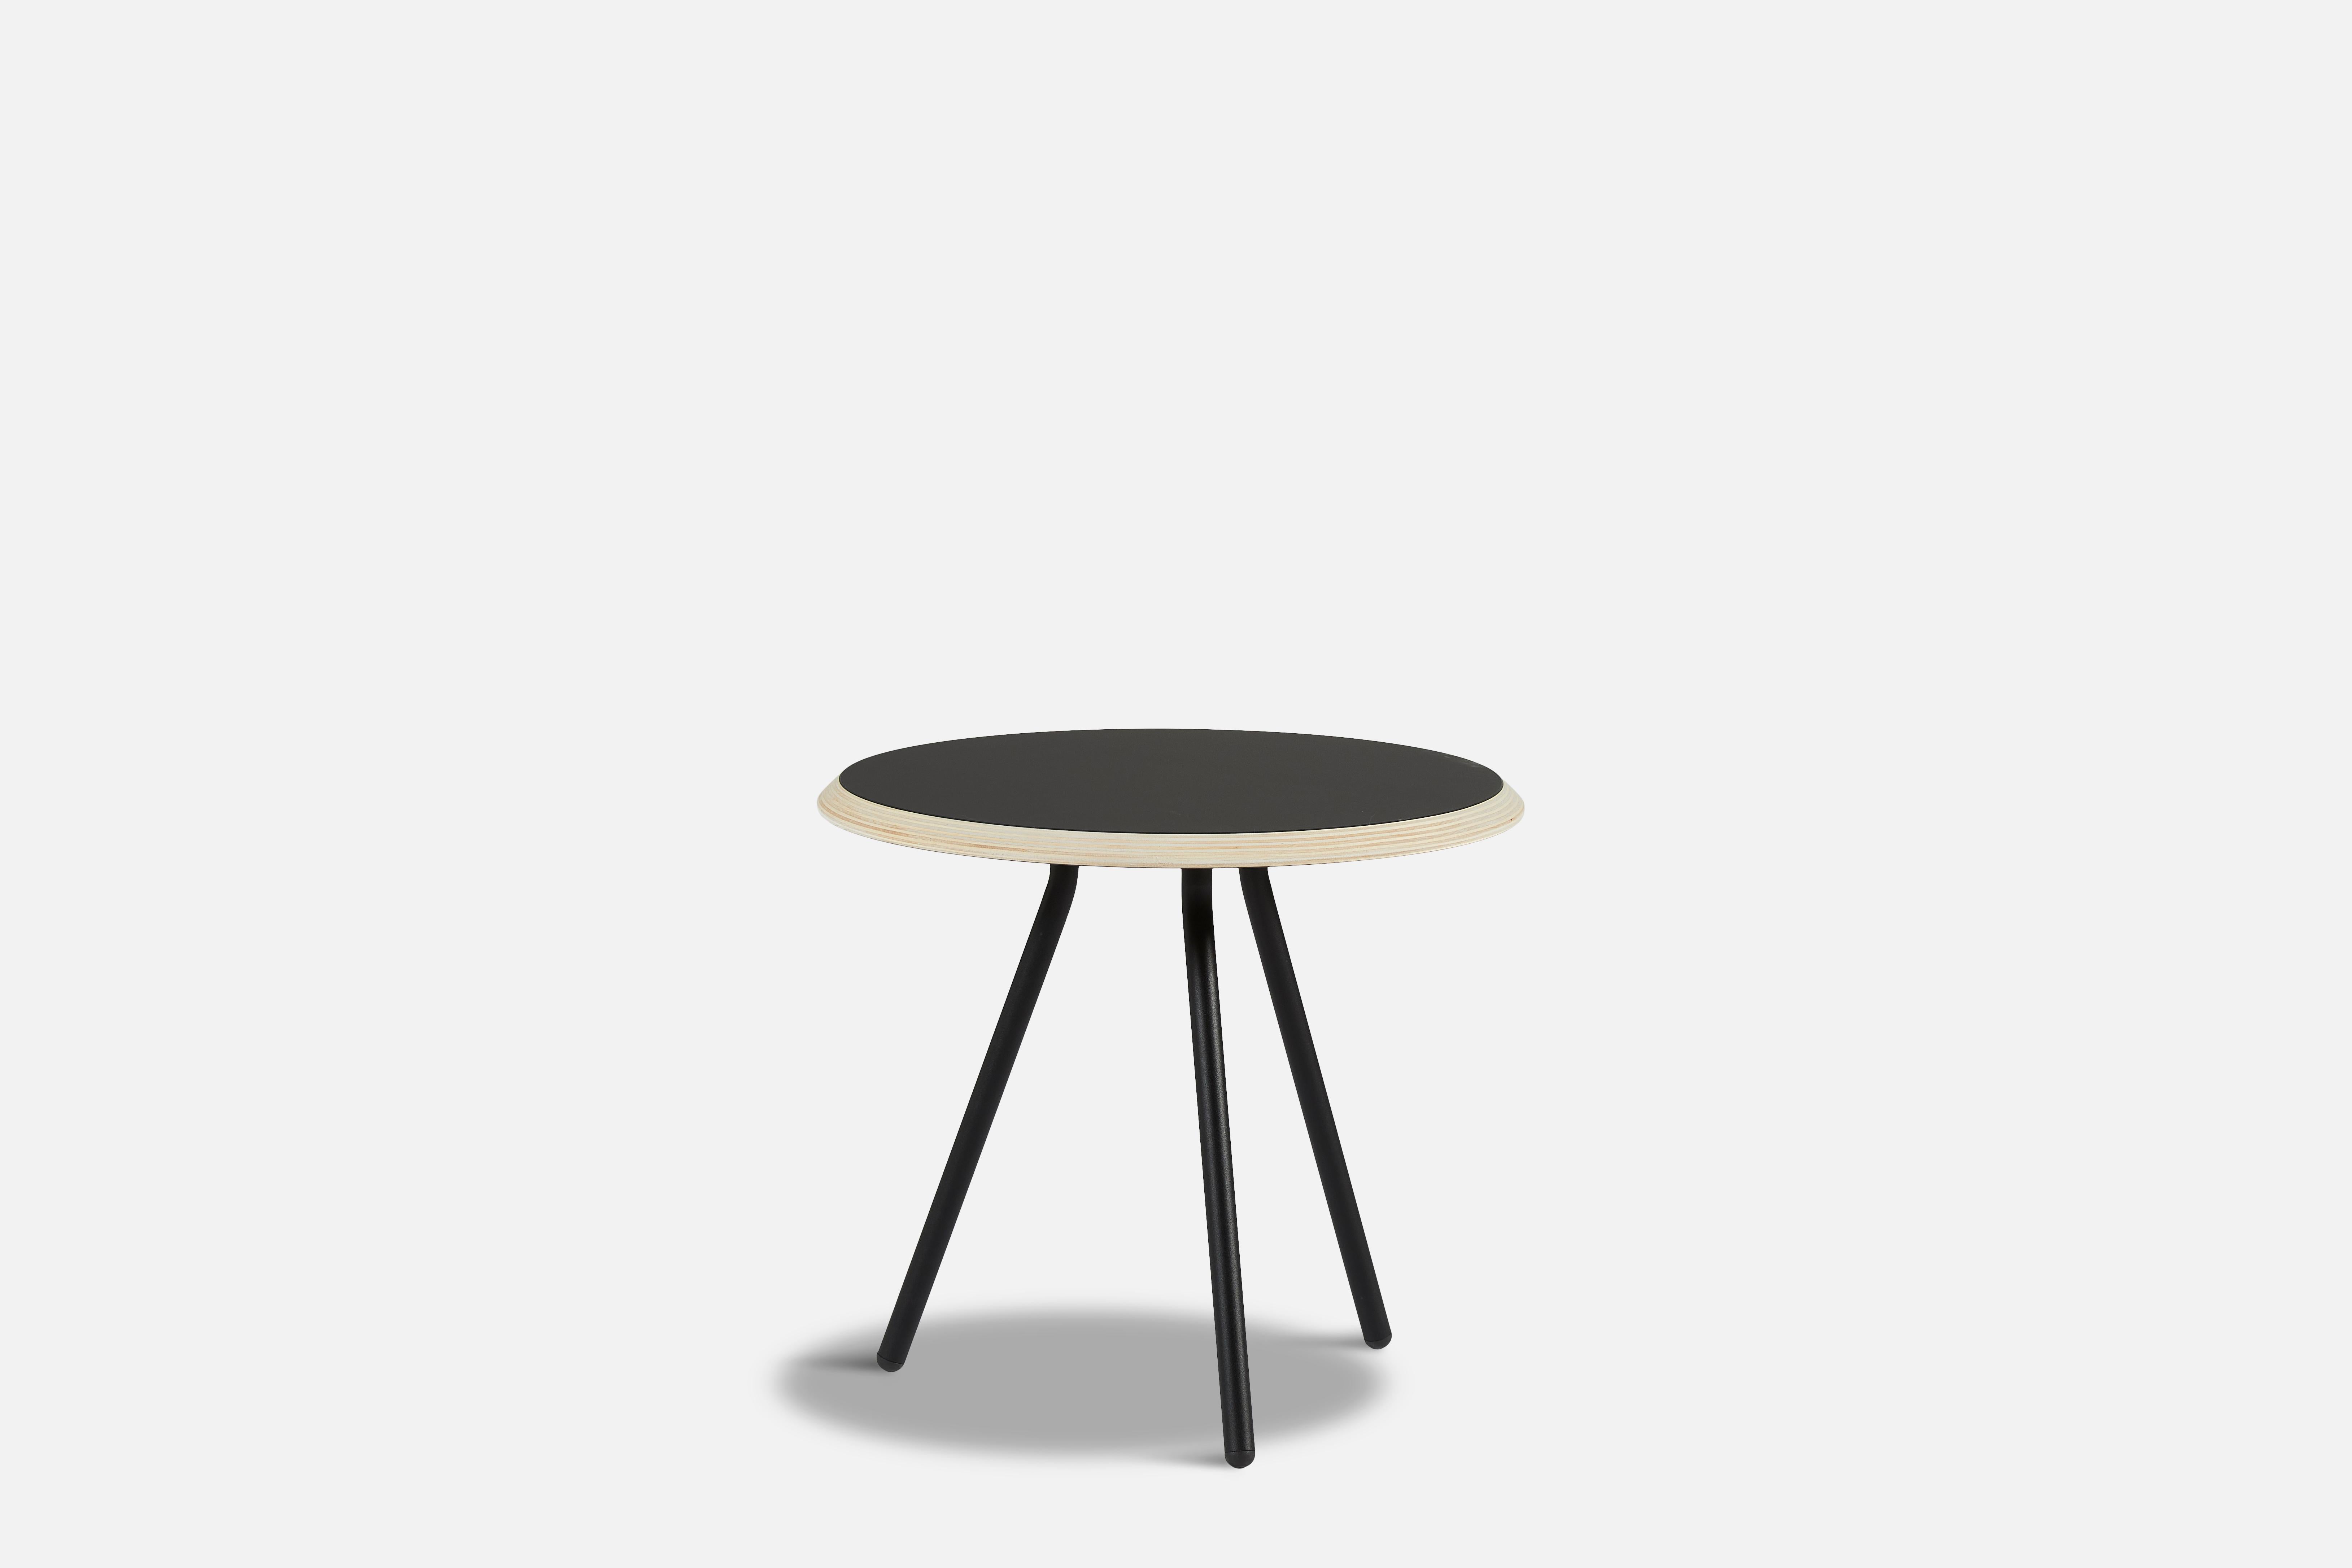 Black laminate soround side table by Nur Design
Materials: Metal, fenix laminate
Dimensions: D 45 x W 45 x H 49 cm.
Also available in different sizes.

The founders, Mia and Torben Koed, decided to put their 30 years of experience into a new